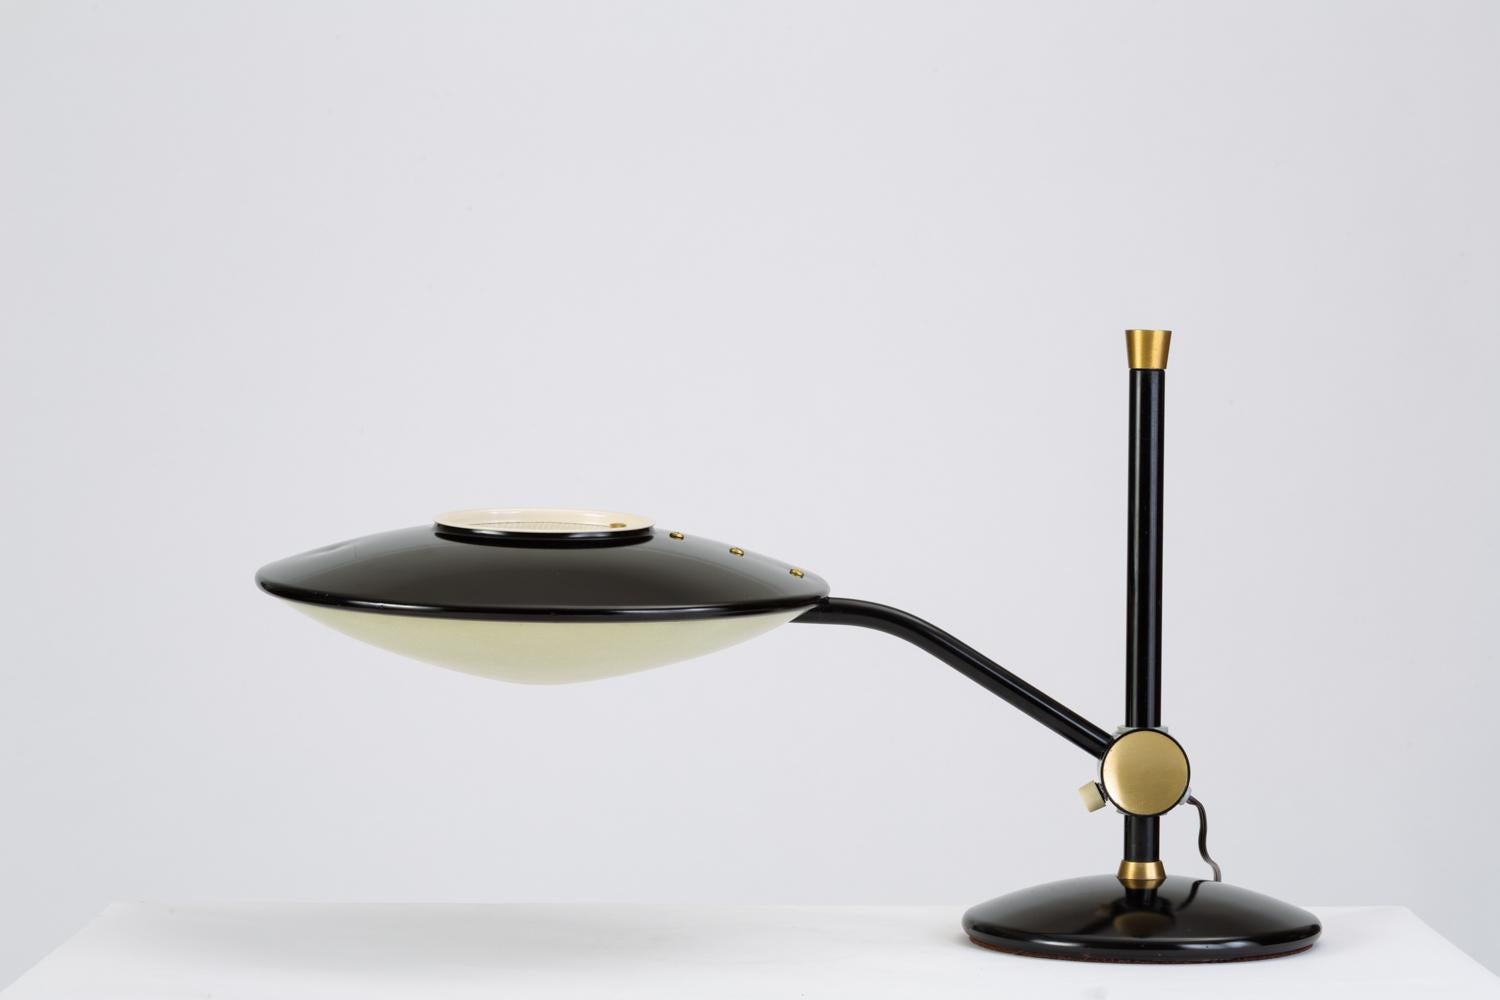 20th Century Black-Enameled Desk Lamp with Brass Accents by Dazor